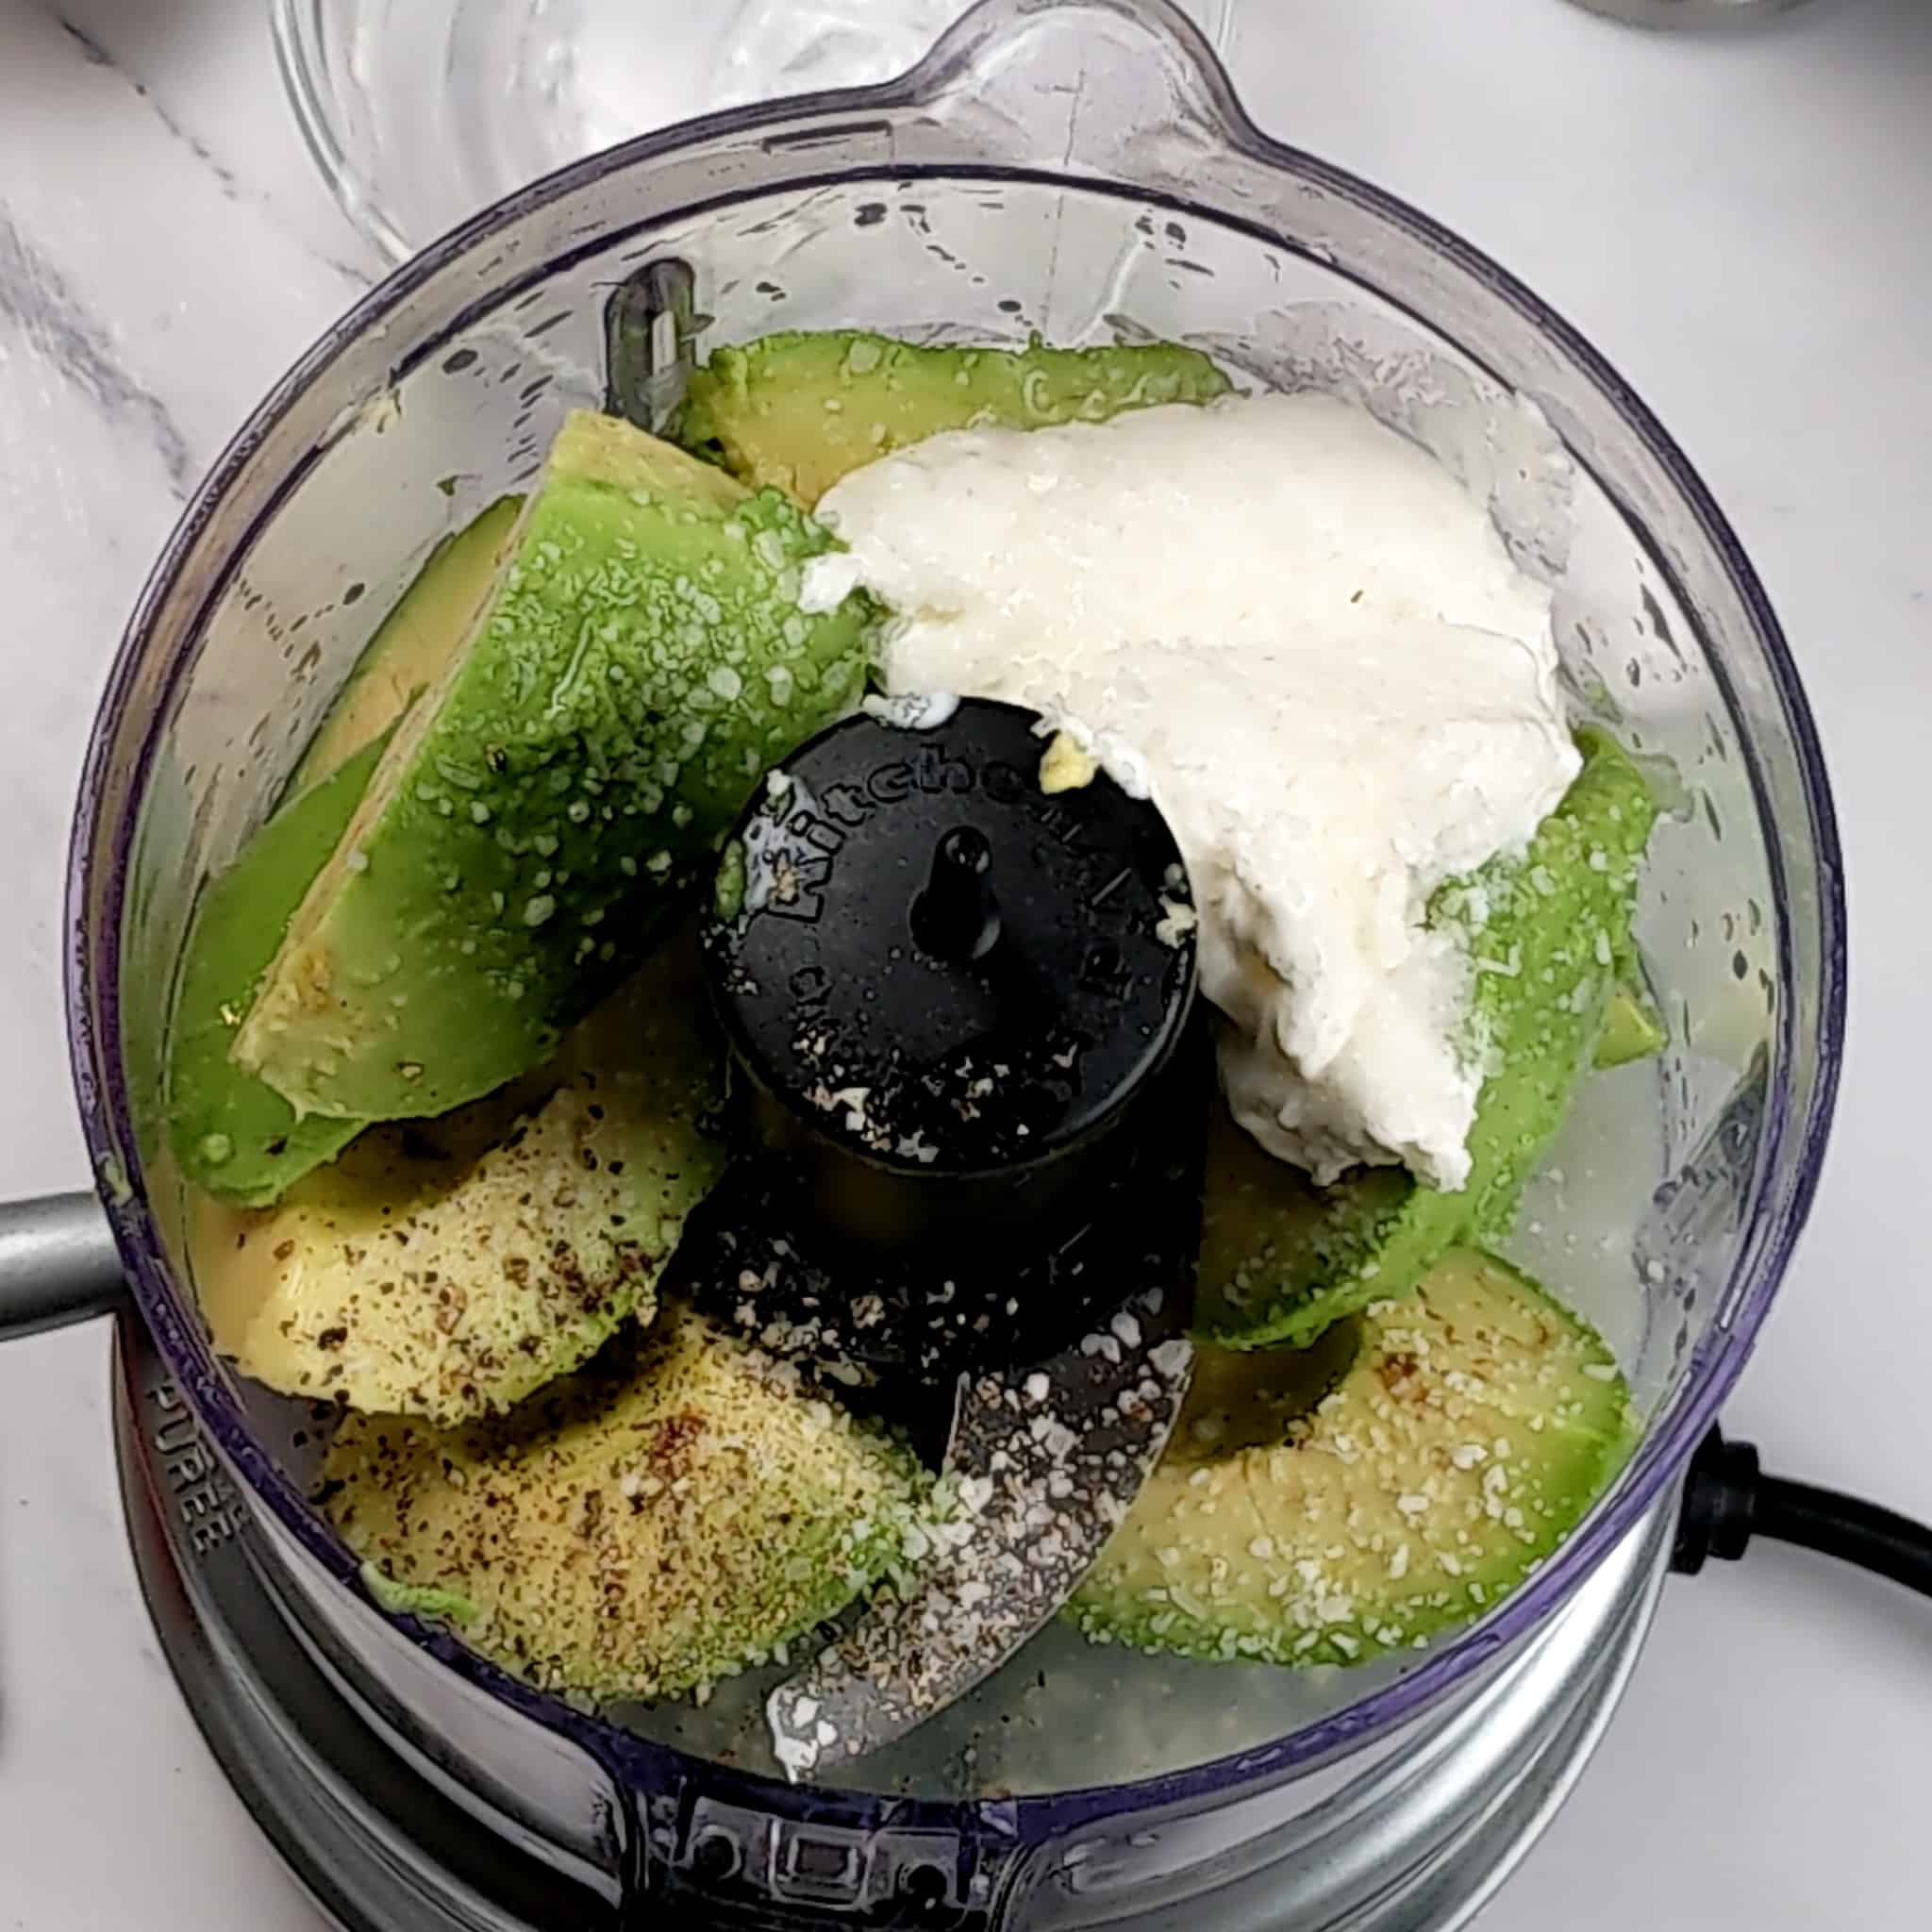 large chunks of ripe avocado, sour cream, salt and pepper in an open food processor.